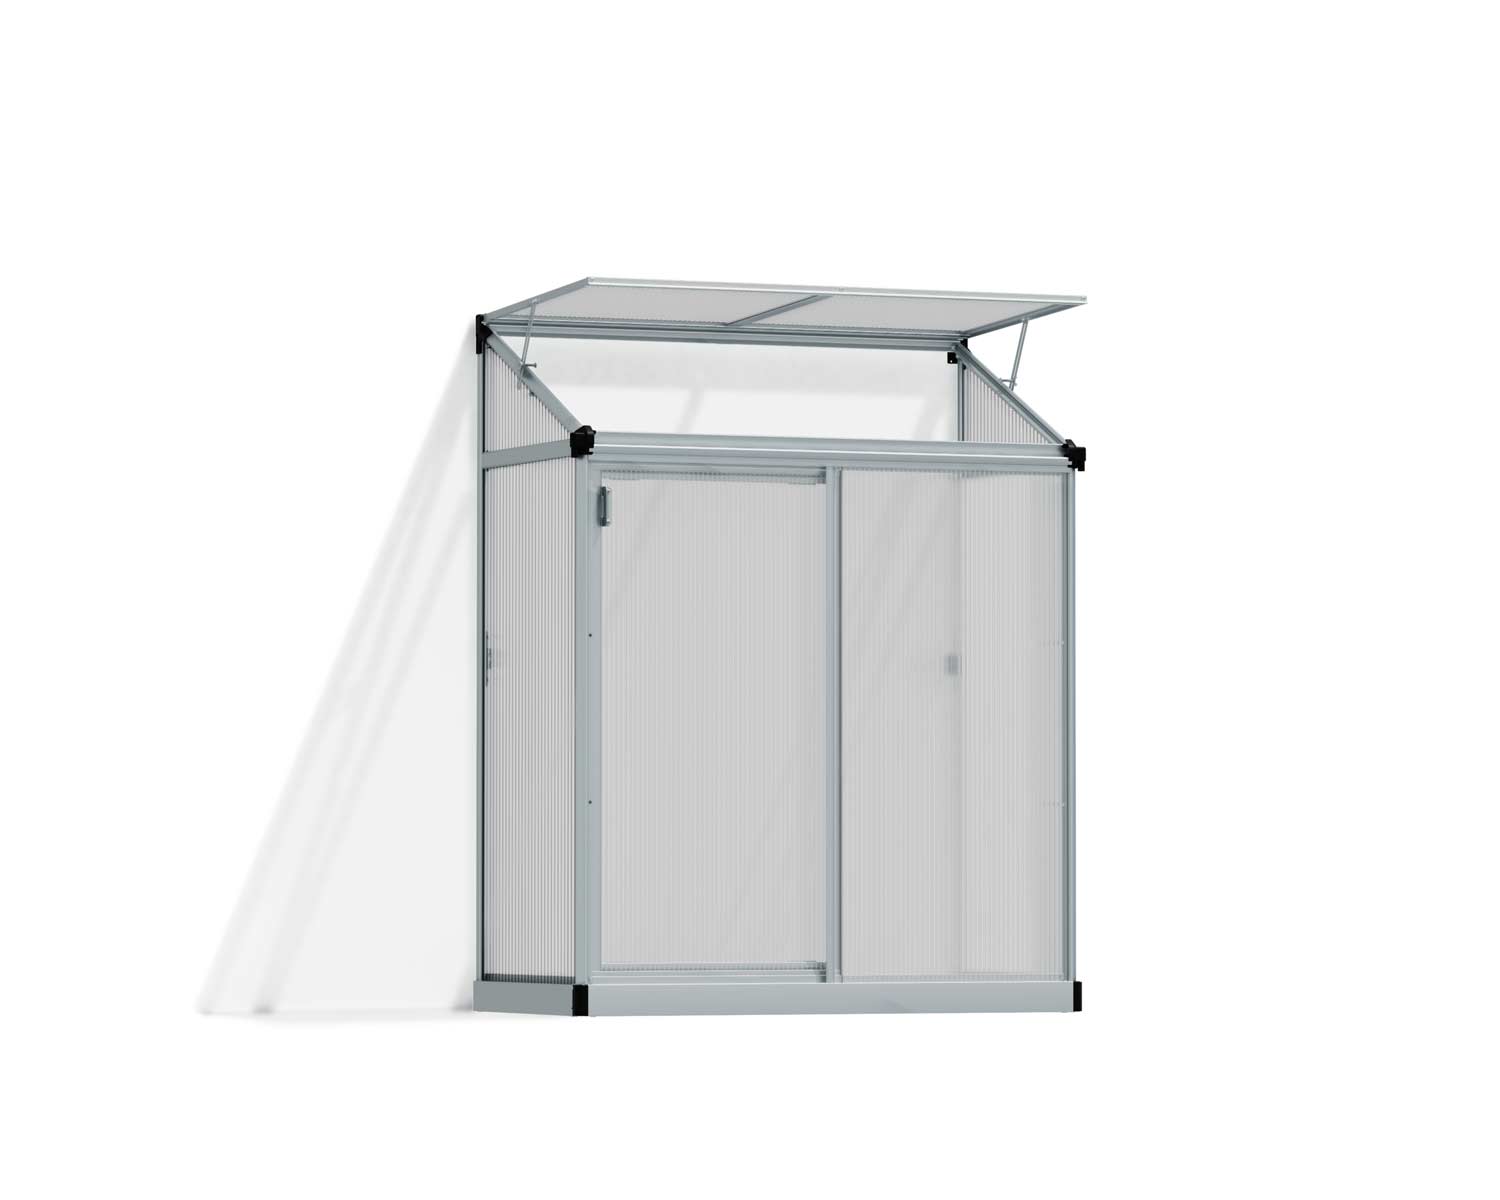 Lean To Greenhouse 4' x 2' Kit - Silver Structure & Twinwall Glazing